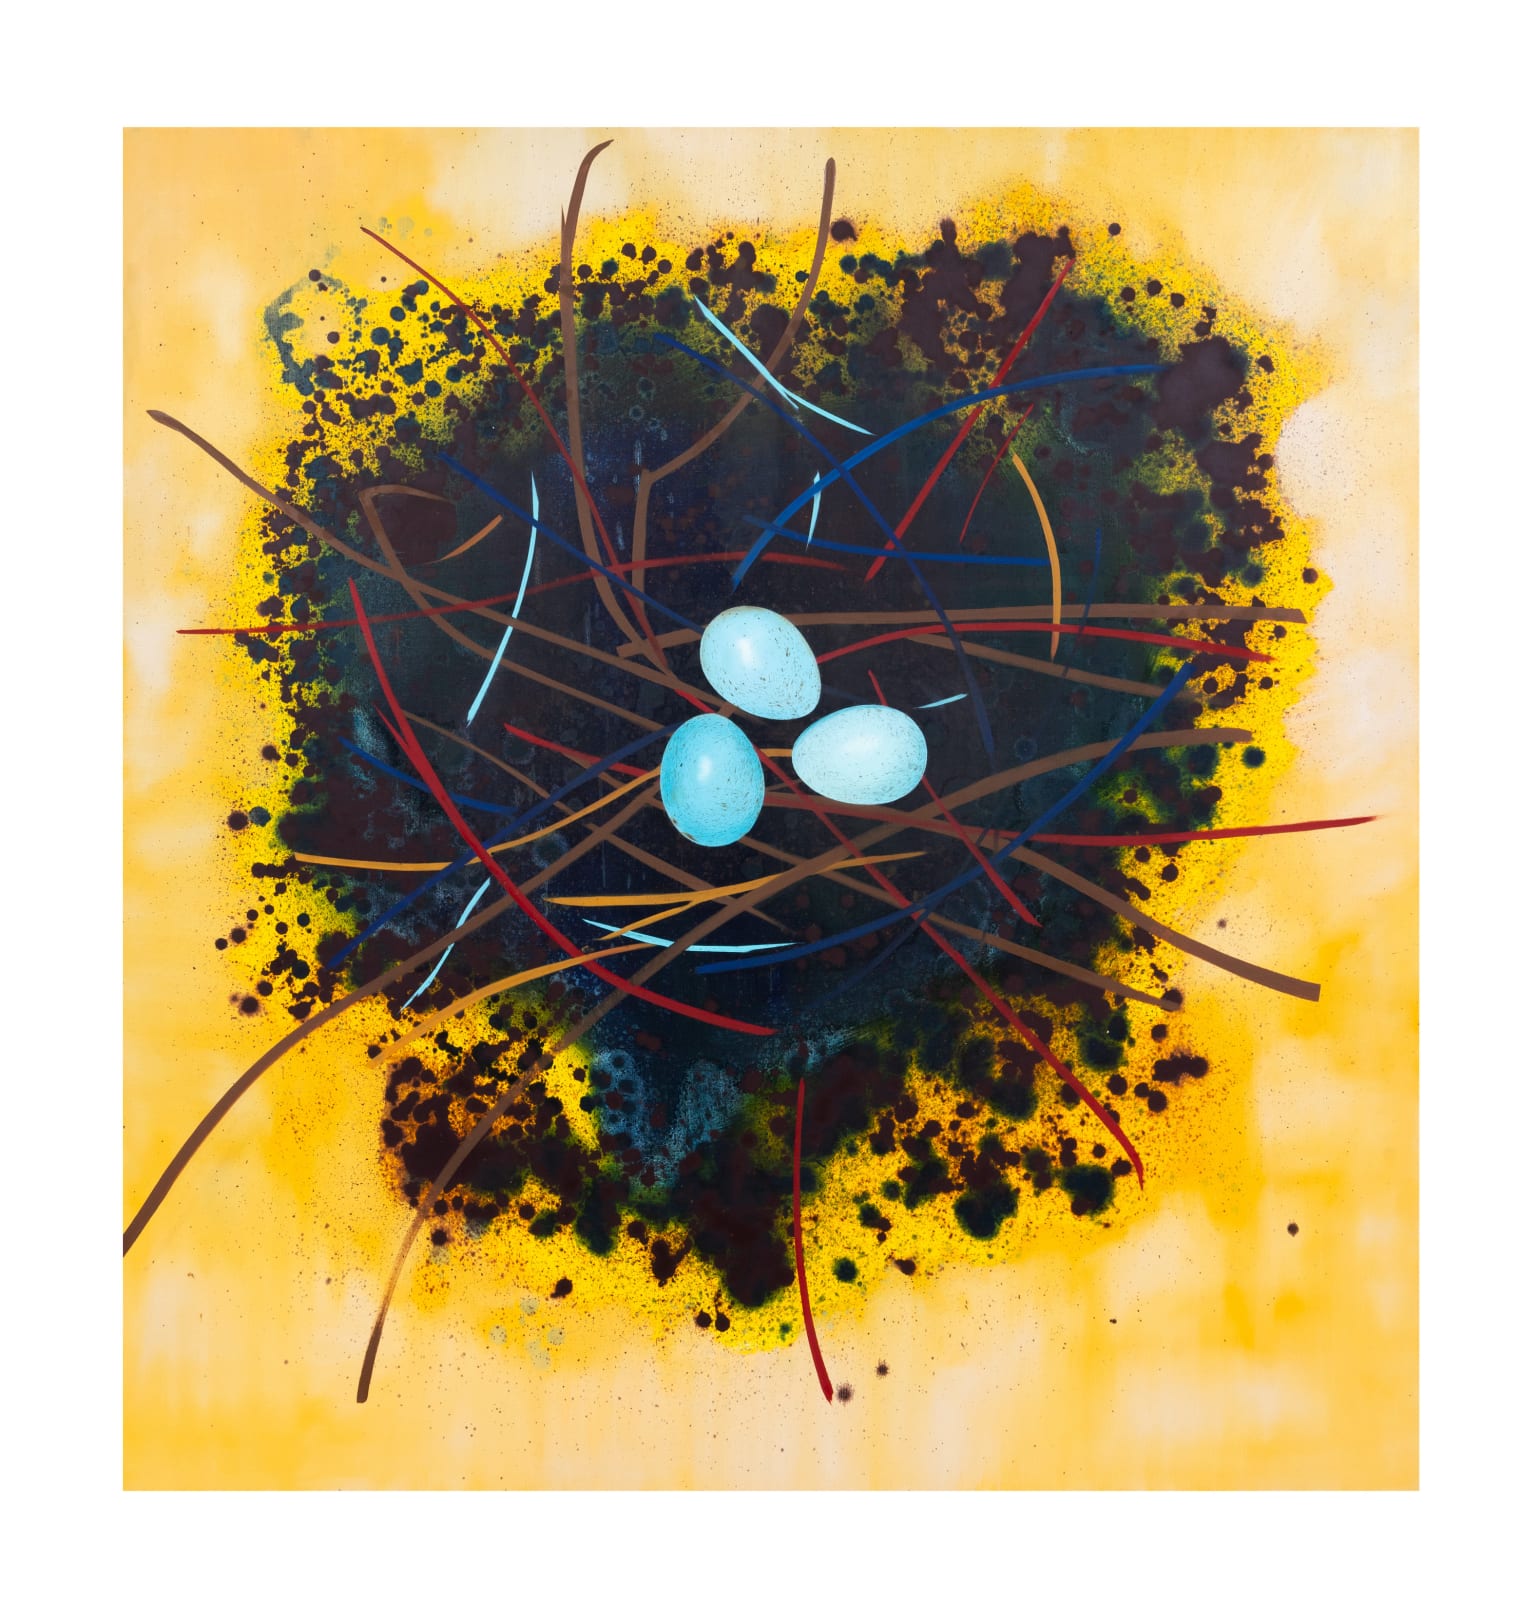 Painting featuring a dark nest containing three blue eggs against a yellow background.